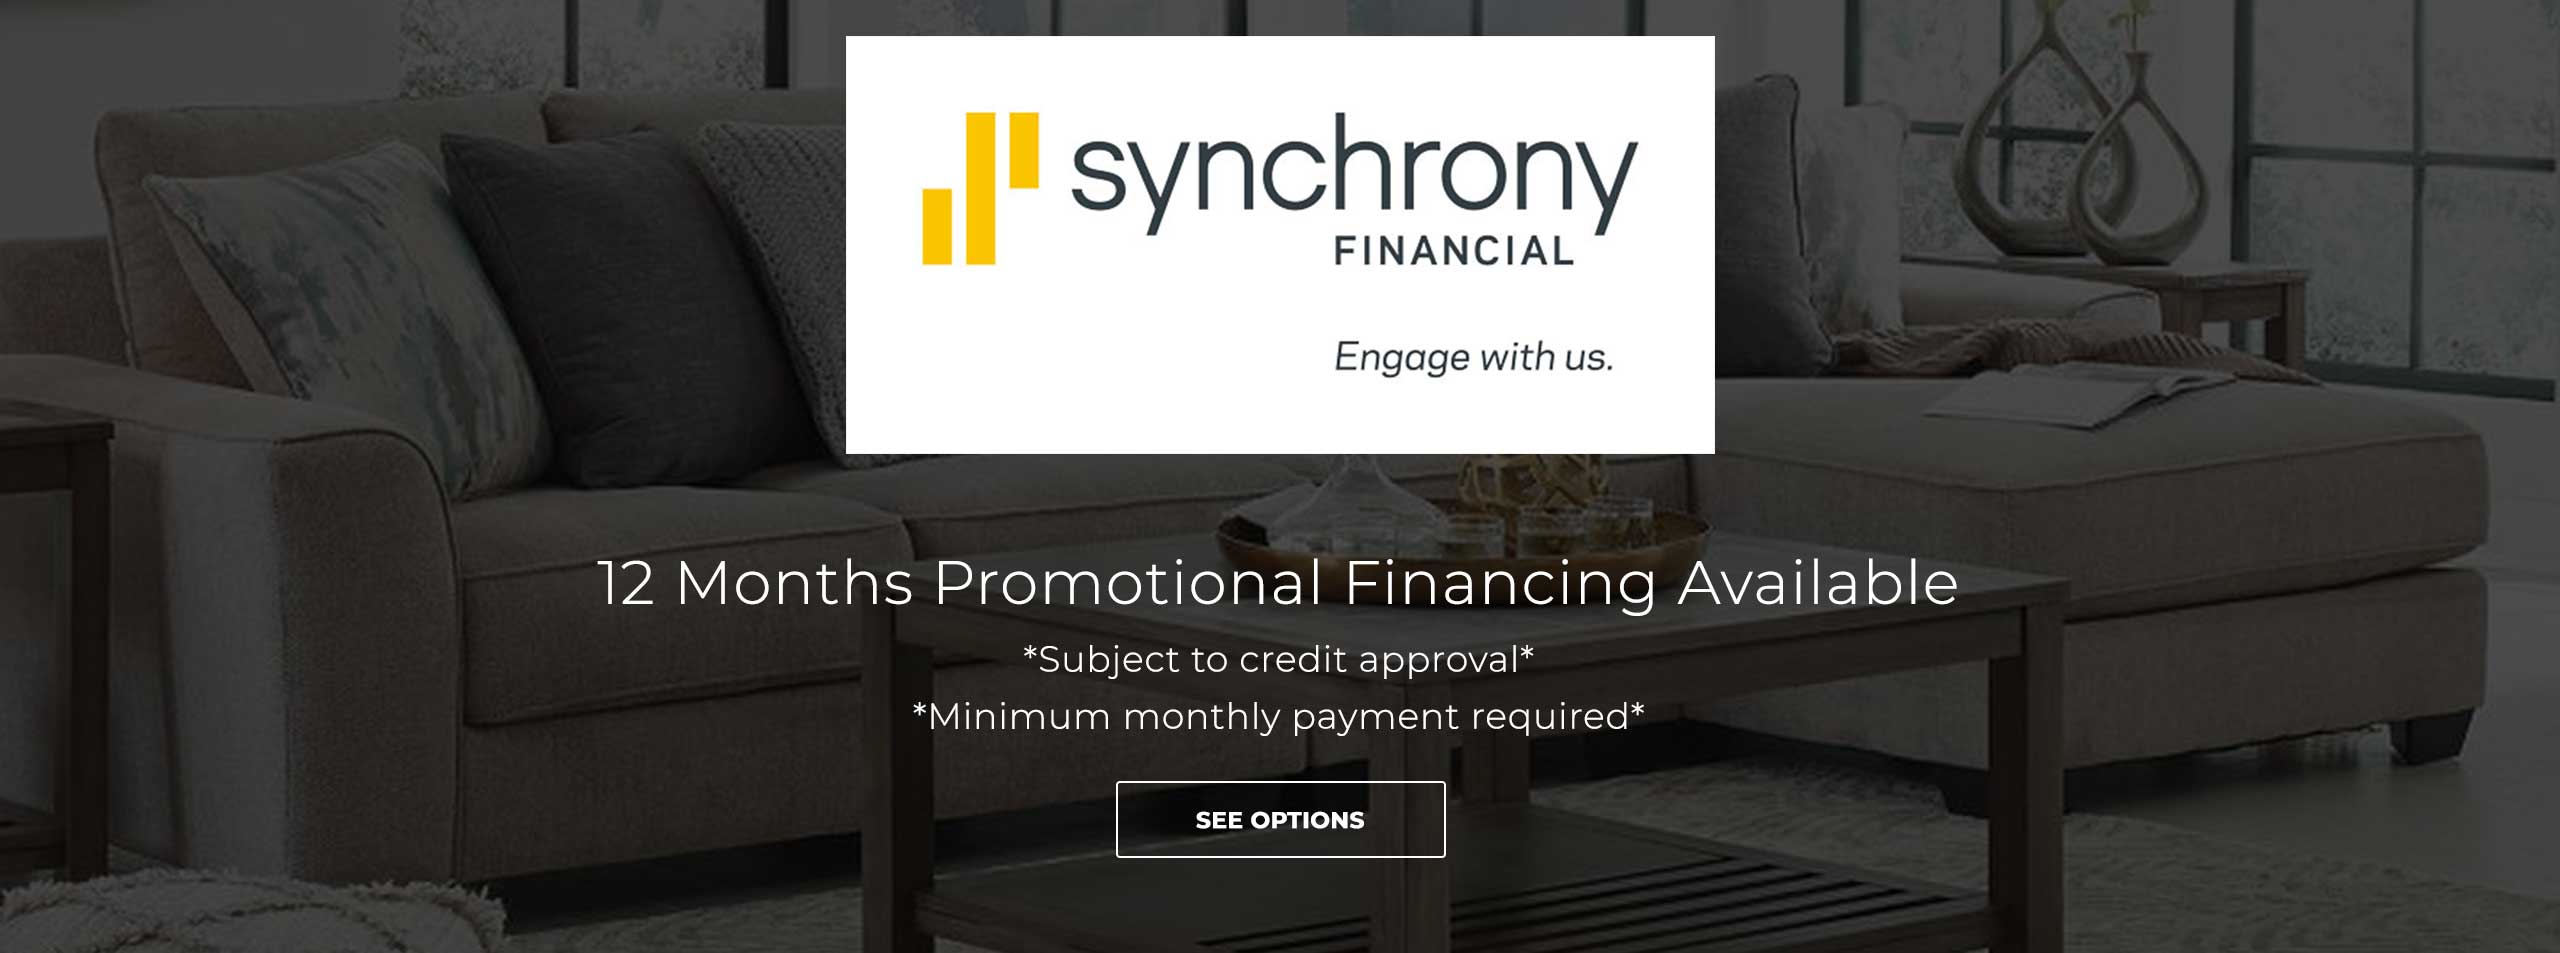 Finance Options with Synchrony